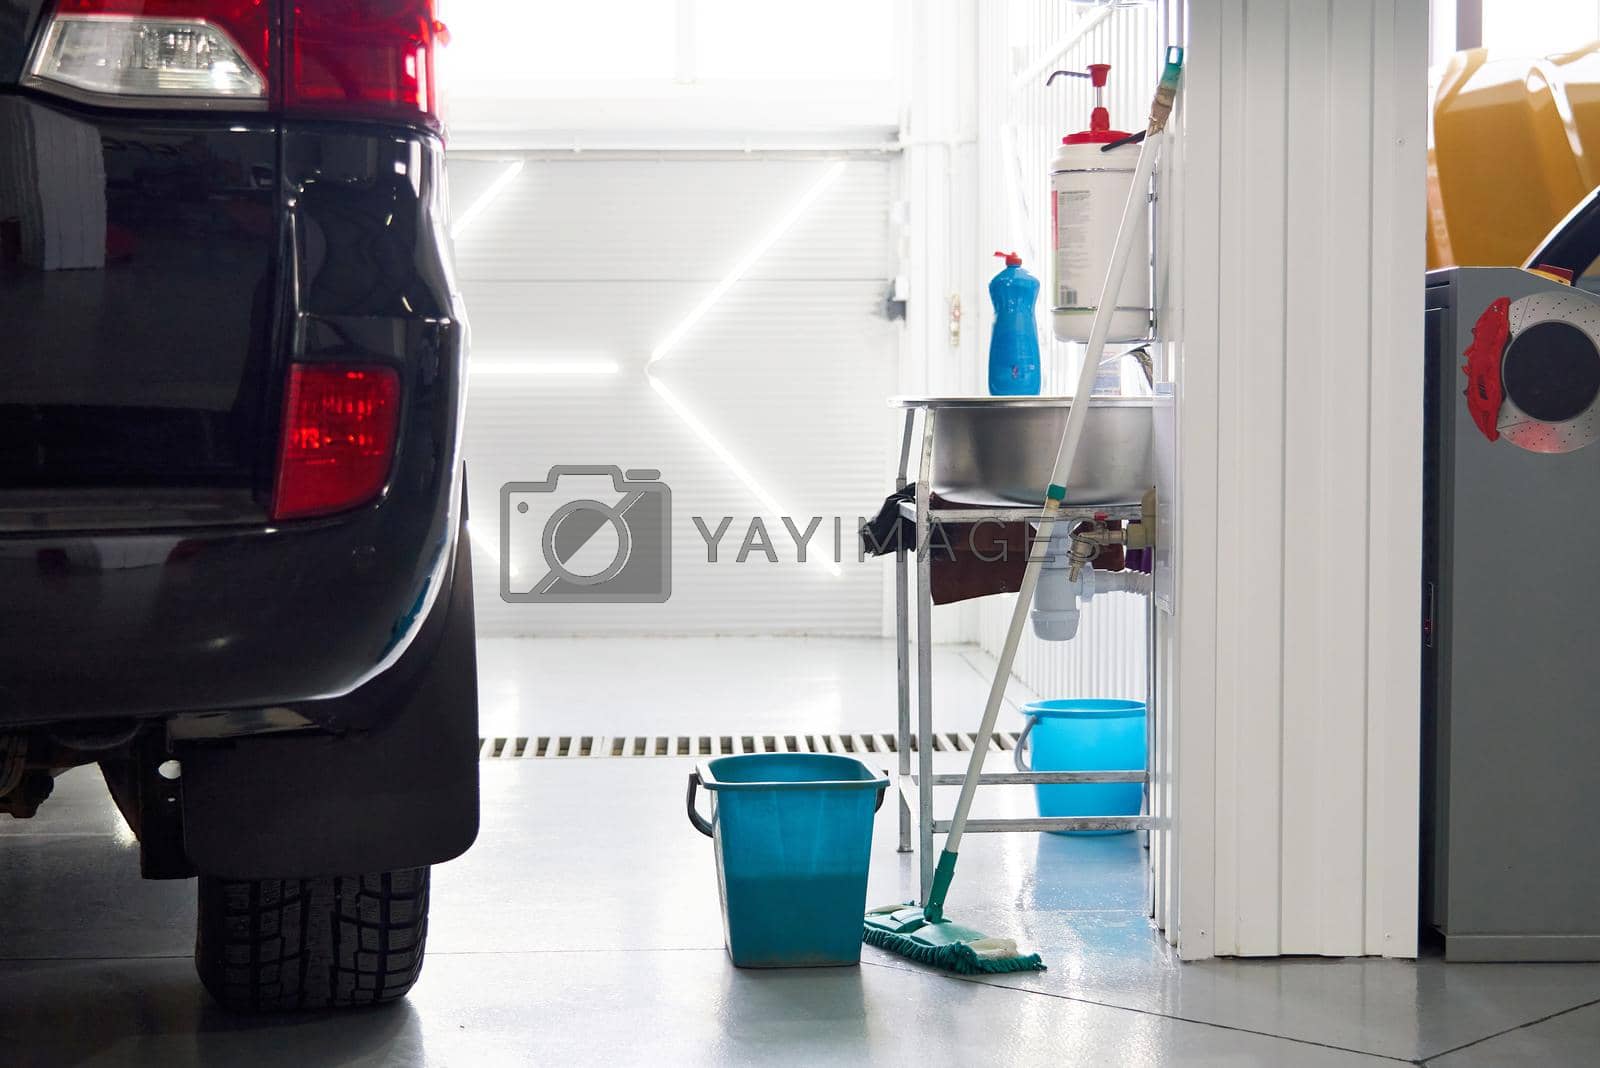 Royalty free image of cleaning floor in car workshop, keeping work place clean by Mariakray